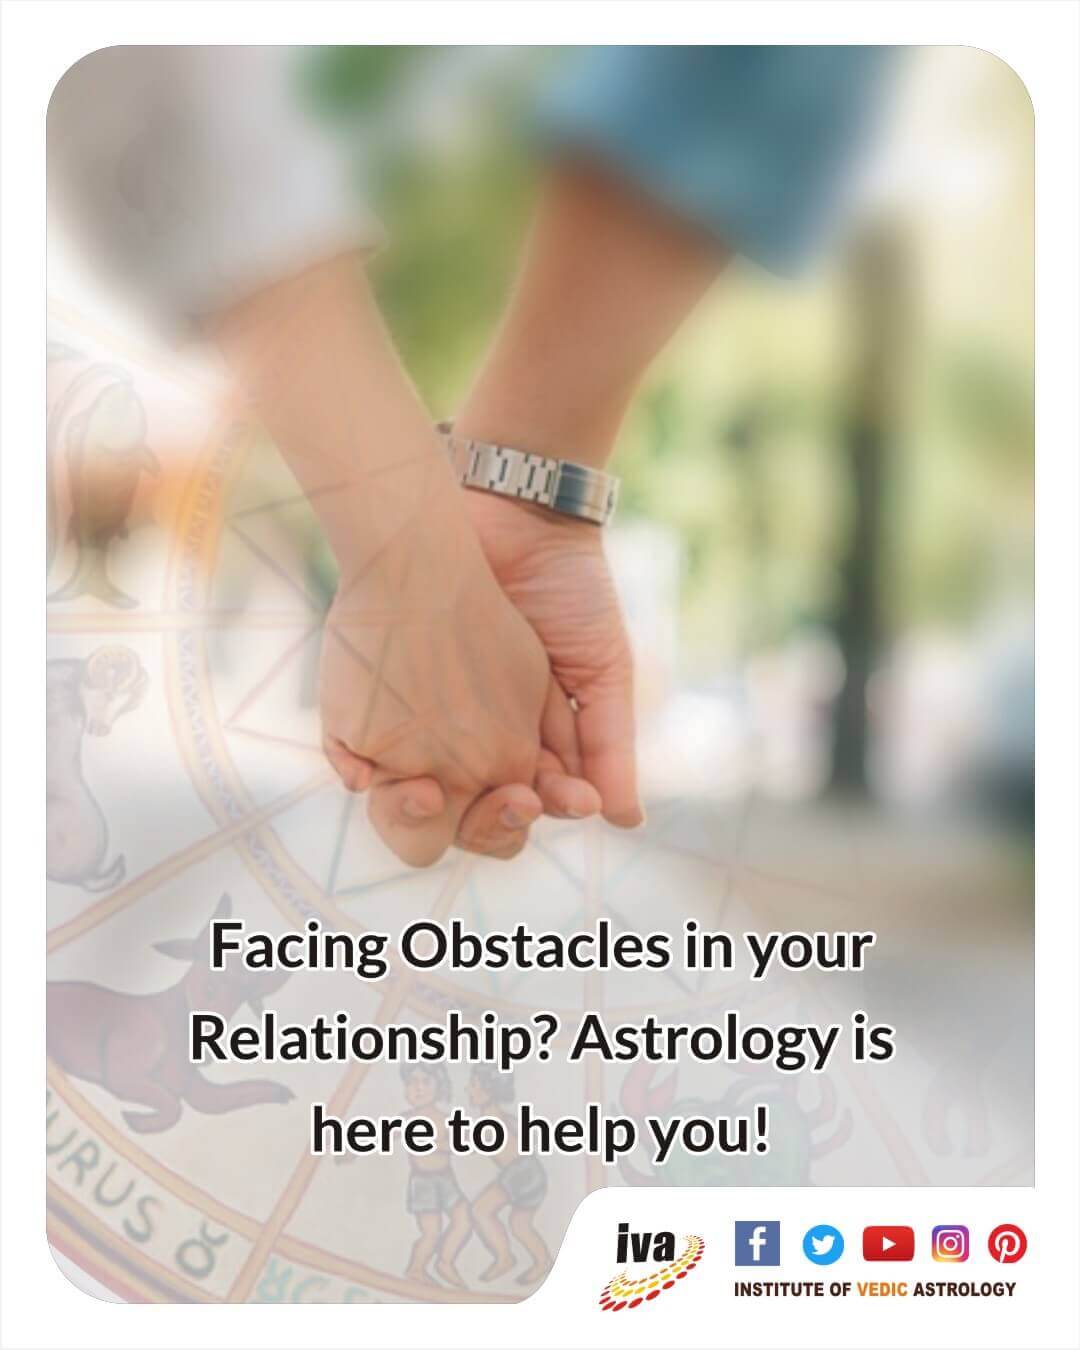 Facing Obstacles in your relationship? Astrology is here to help you!